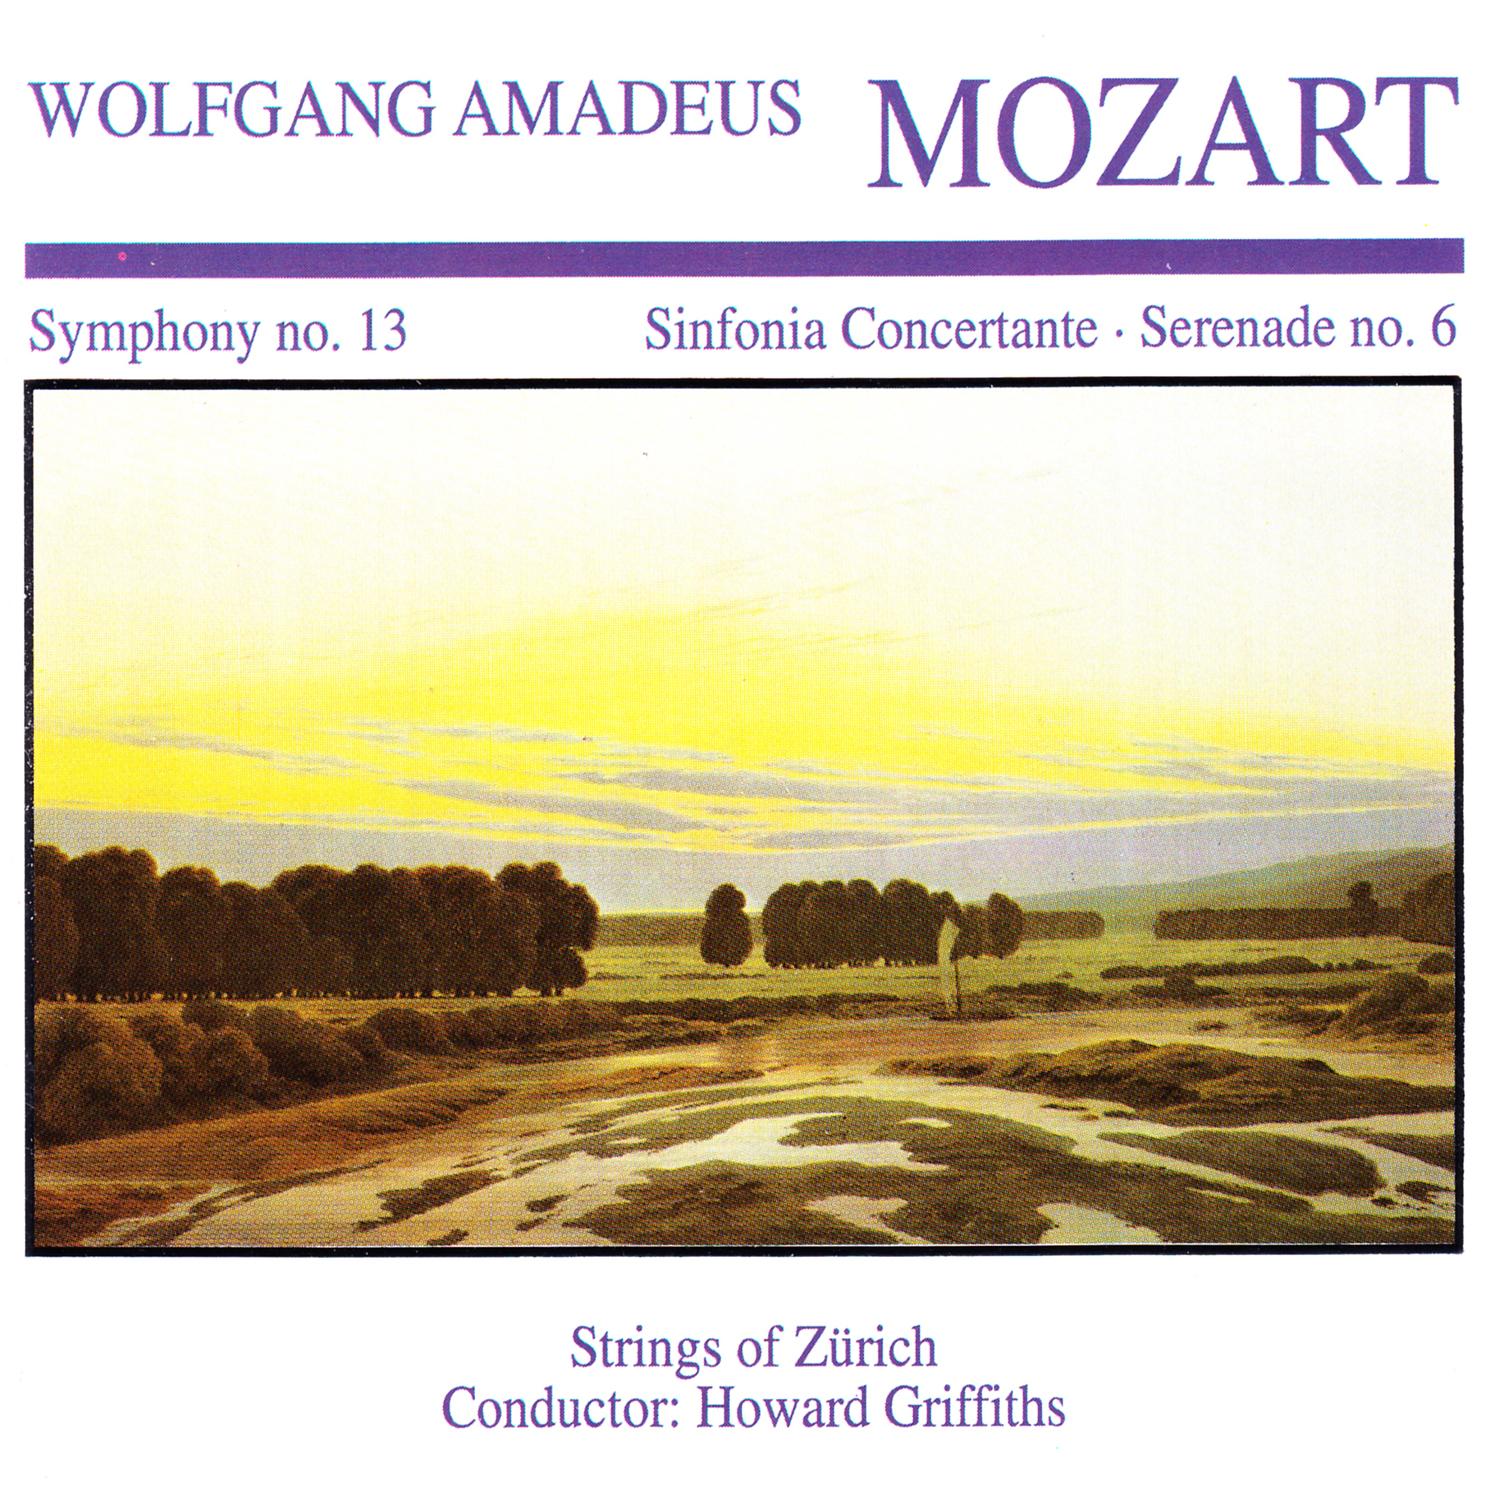 Sinfonia Concertante for Violin, Viola and Orchestra in E-Flat Major, K. 364: II. Andante